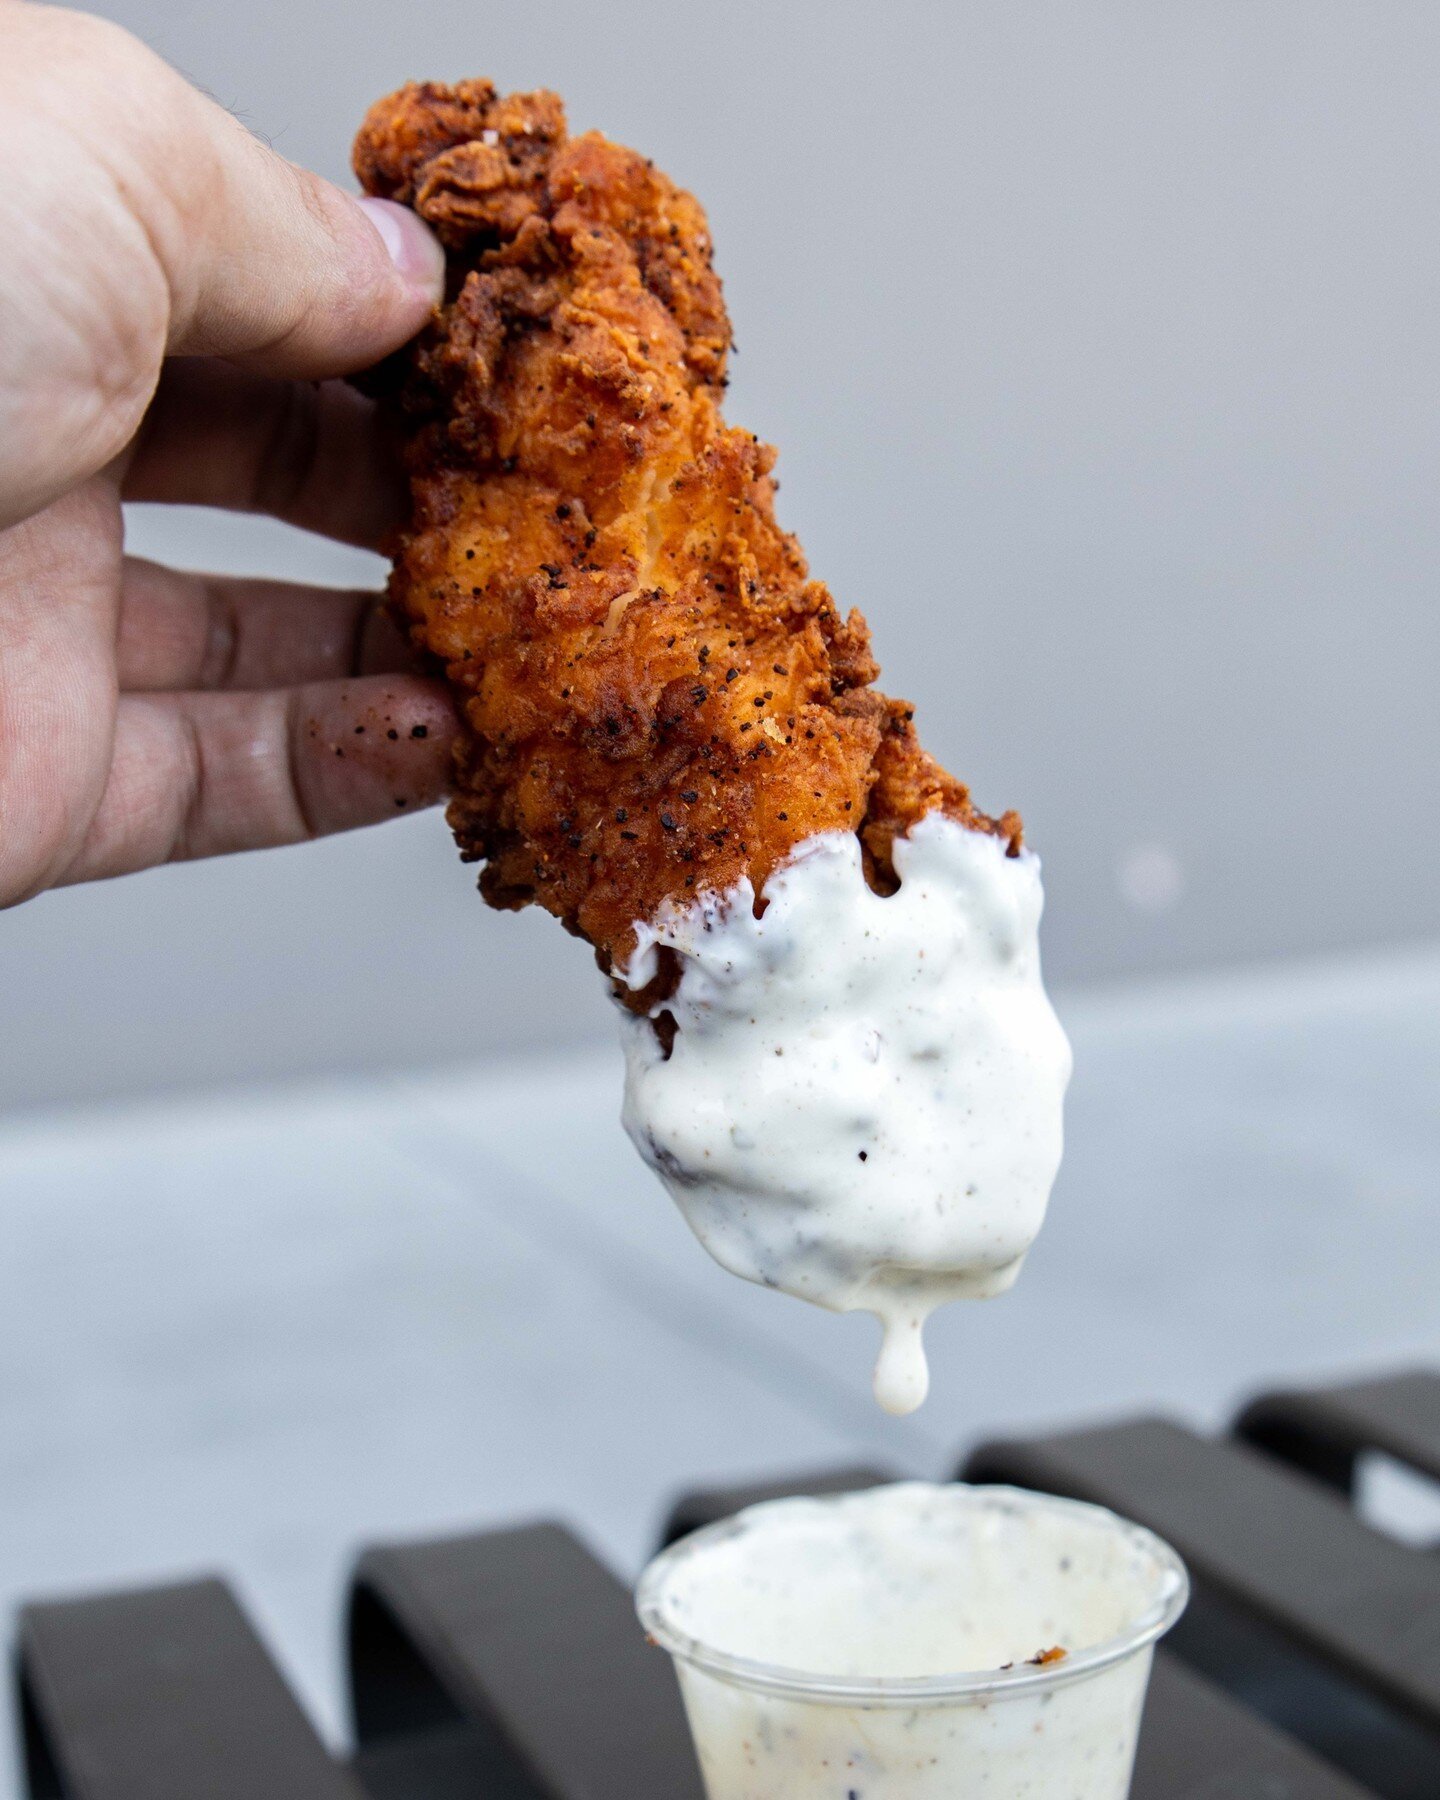 Our bold Coffee BBQ Chicken Strips pair perfectly with our creamy Black Truffle Peppercorn Ranch! Get in touch about catering through our website to see how we can load up your next event with these and so much more 😋